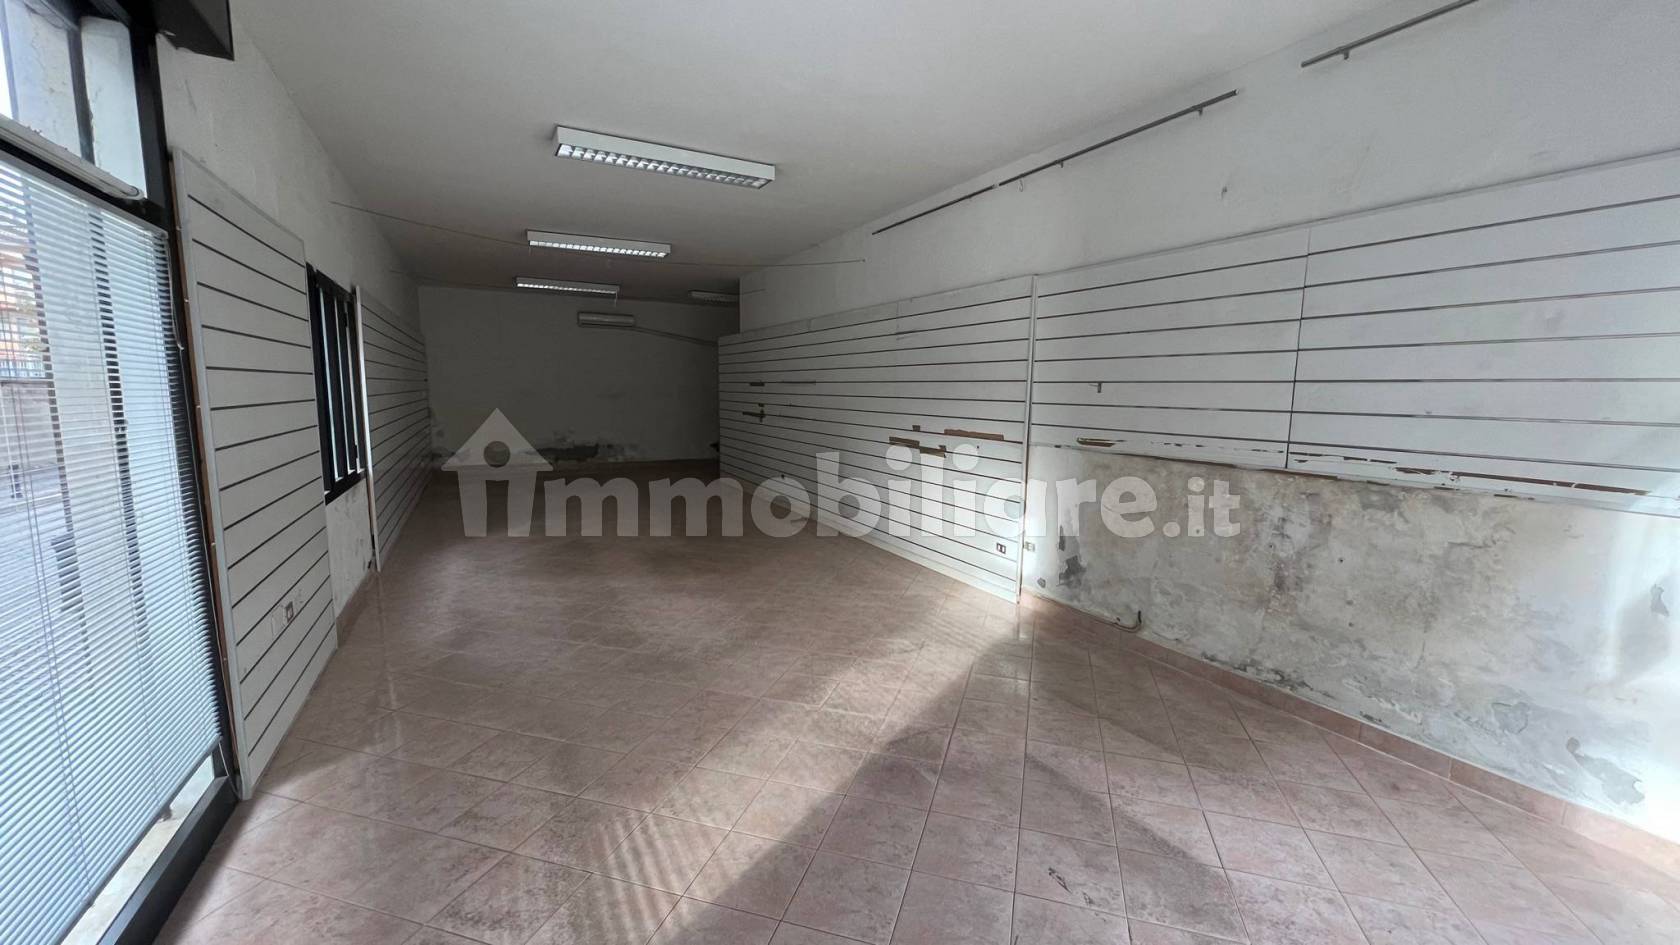 SOTTOMARINA, CHIOGGIA, Store for rent of 80 Sq. mt., Good condition, Energetic class: G, composed by: 1 Room, 2 Bathrooms, Price: € 1,600